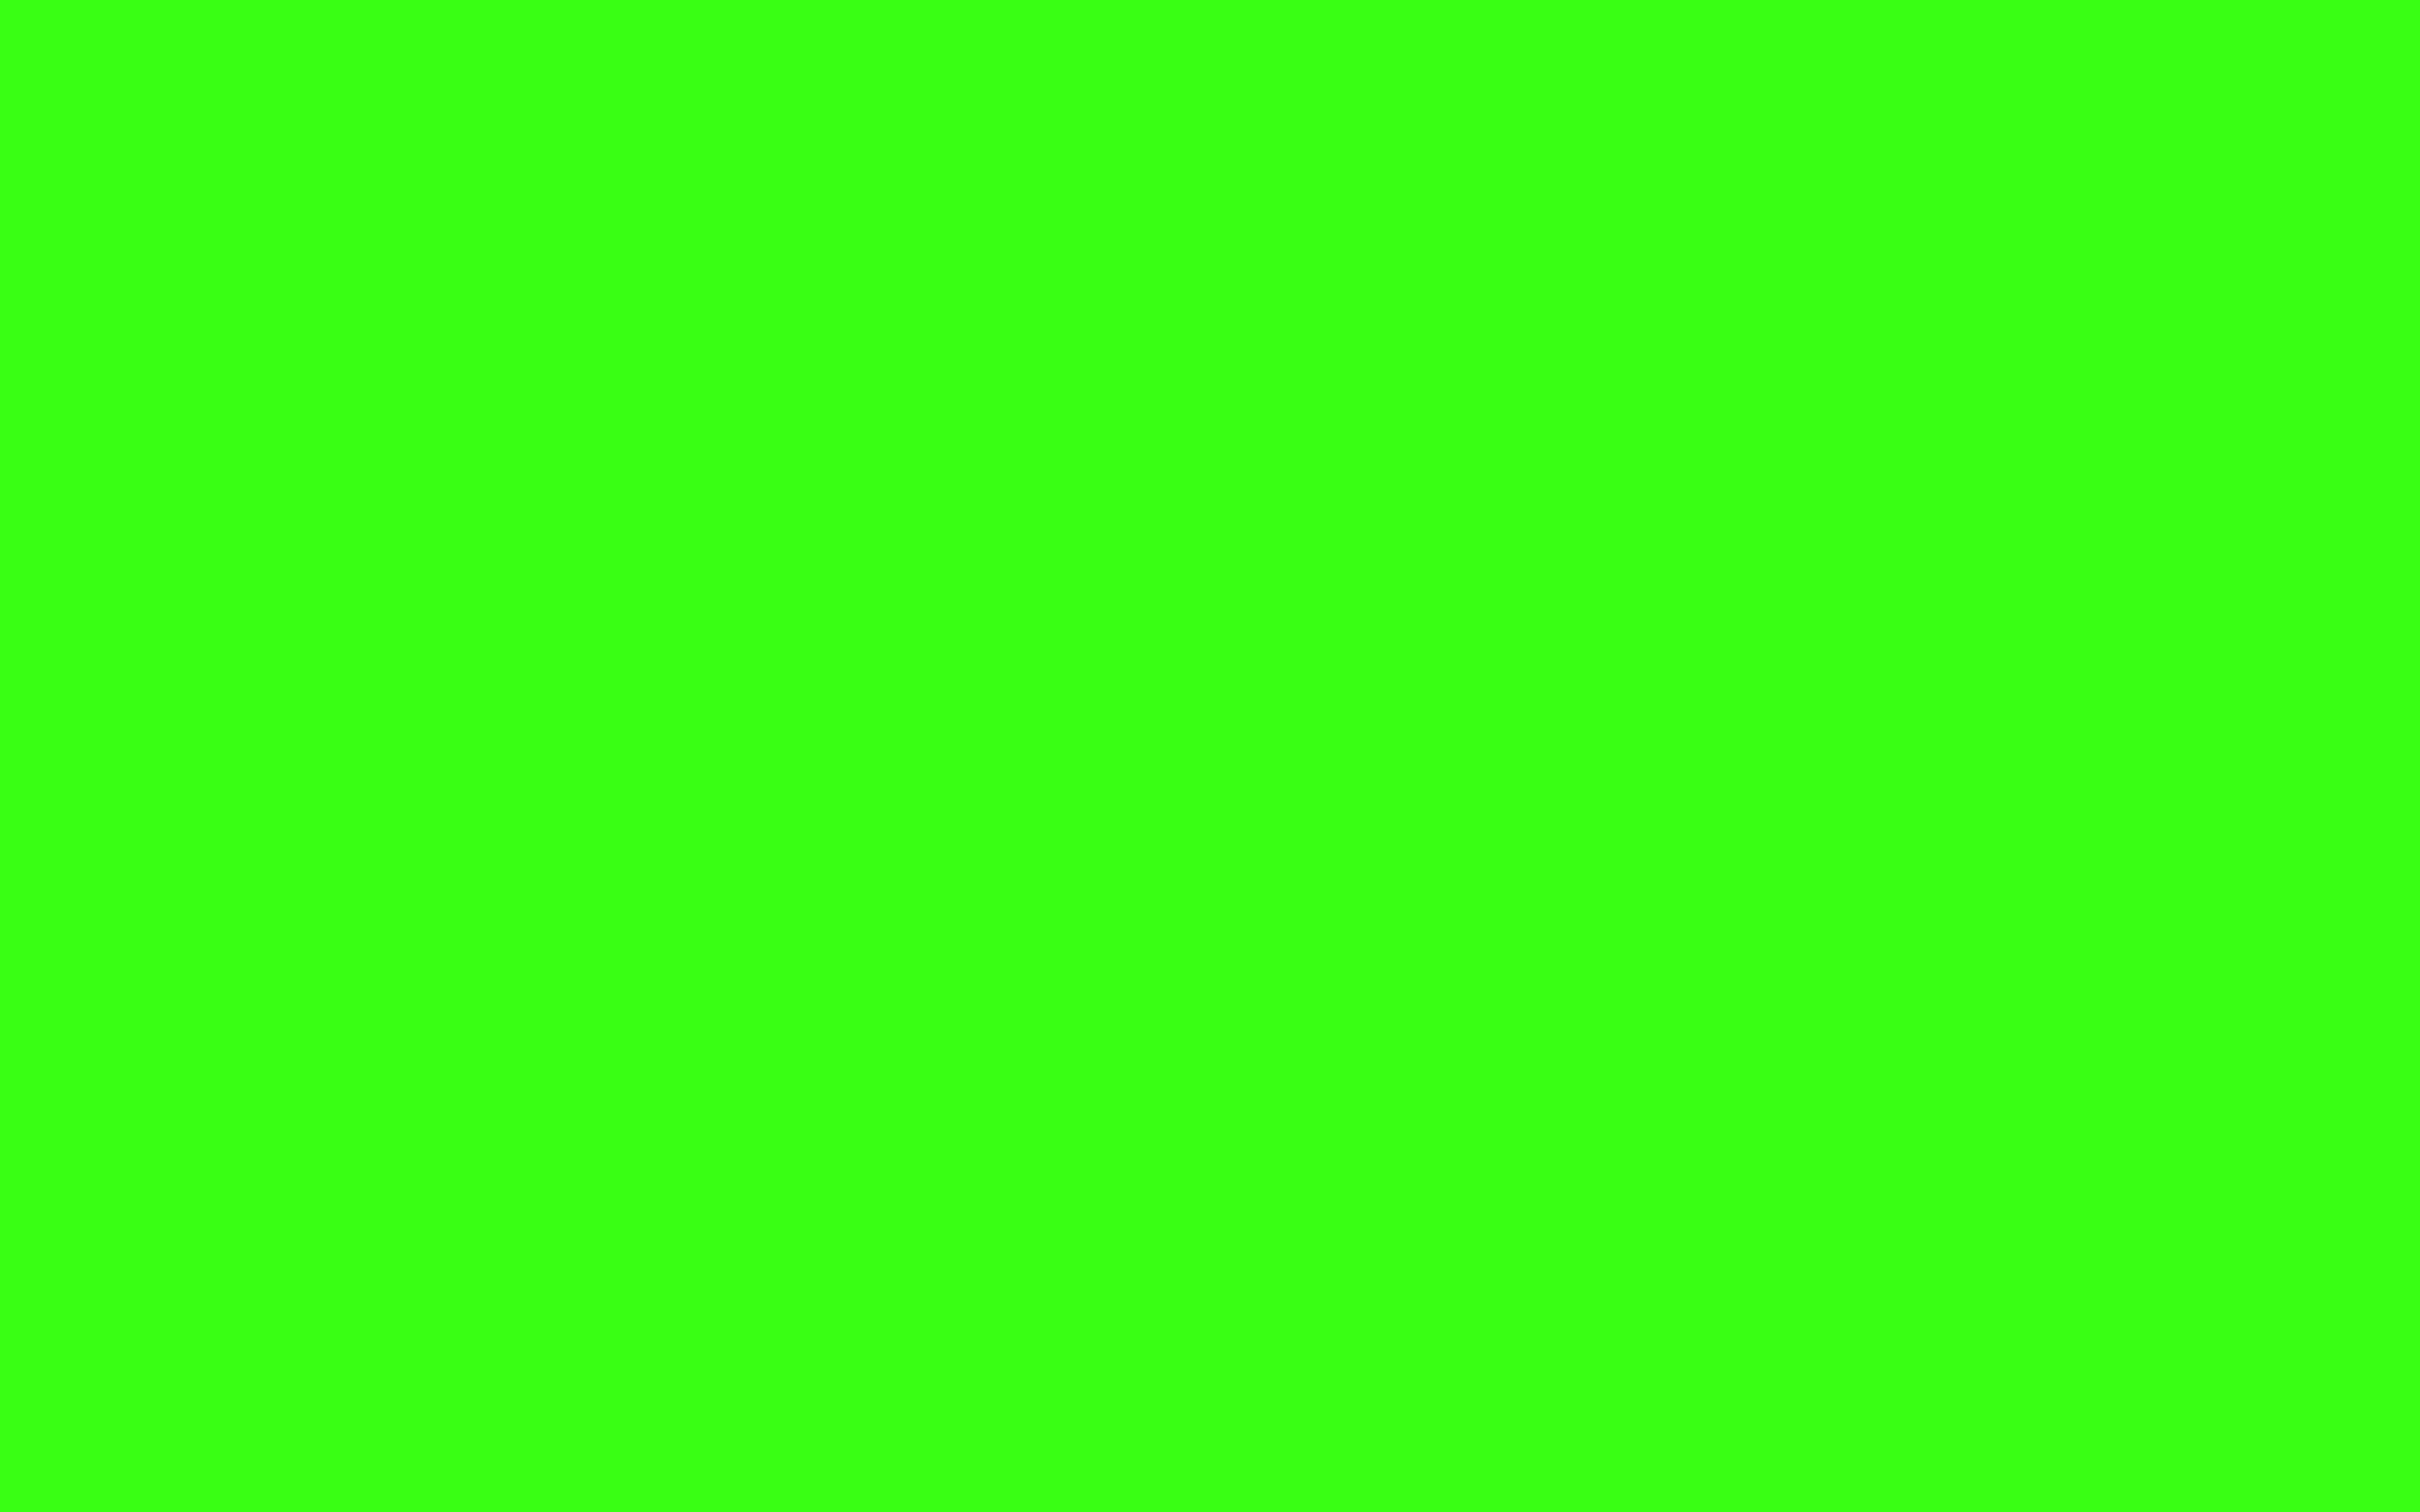 Free 2560x1600 resolution Neon Green solid color background view and